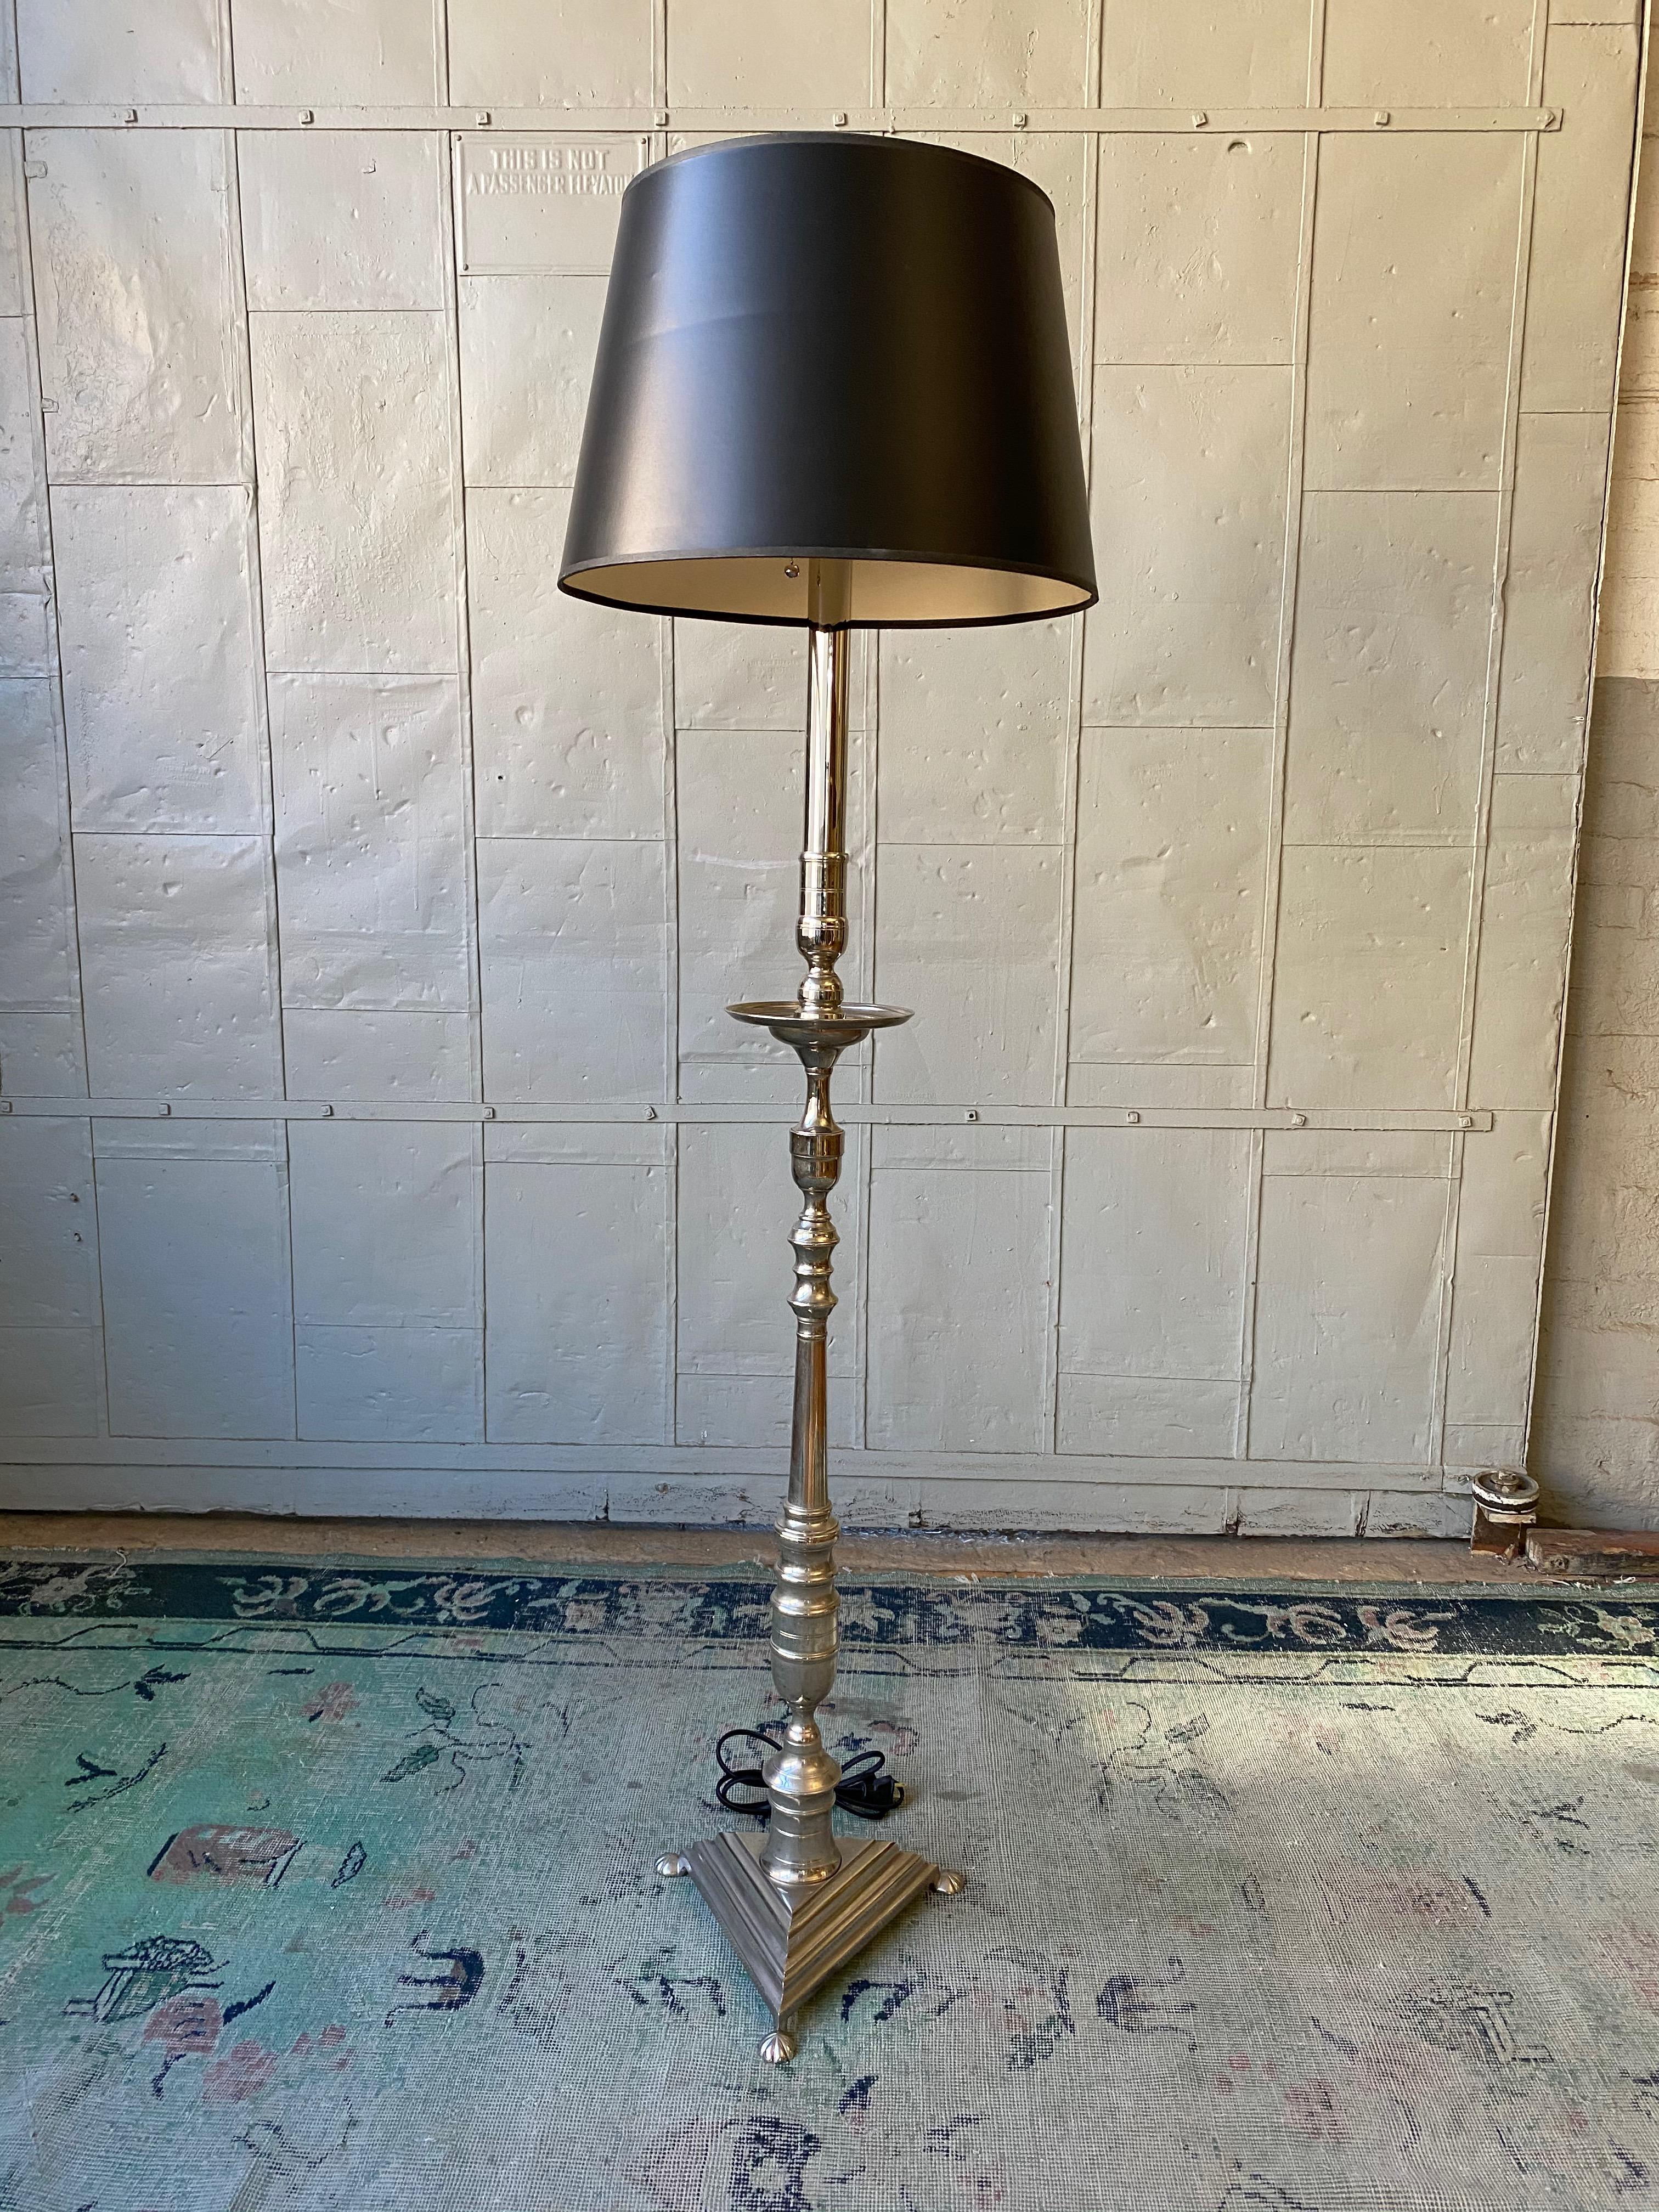 This striking brass and bronze floor lamp stands elegantly on a footed triangular base. Recently plated in a polished nickel finish, the lamp's gleaming surface further enhances its handsome appeal. The floor lamp is wired with a double cluster,